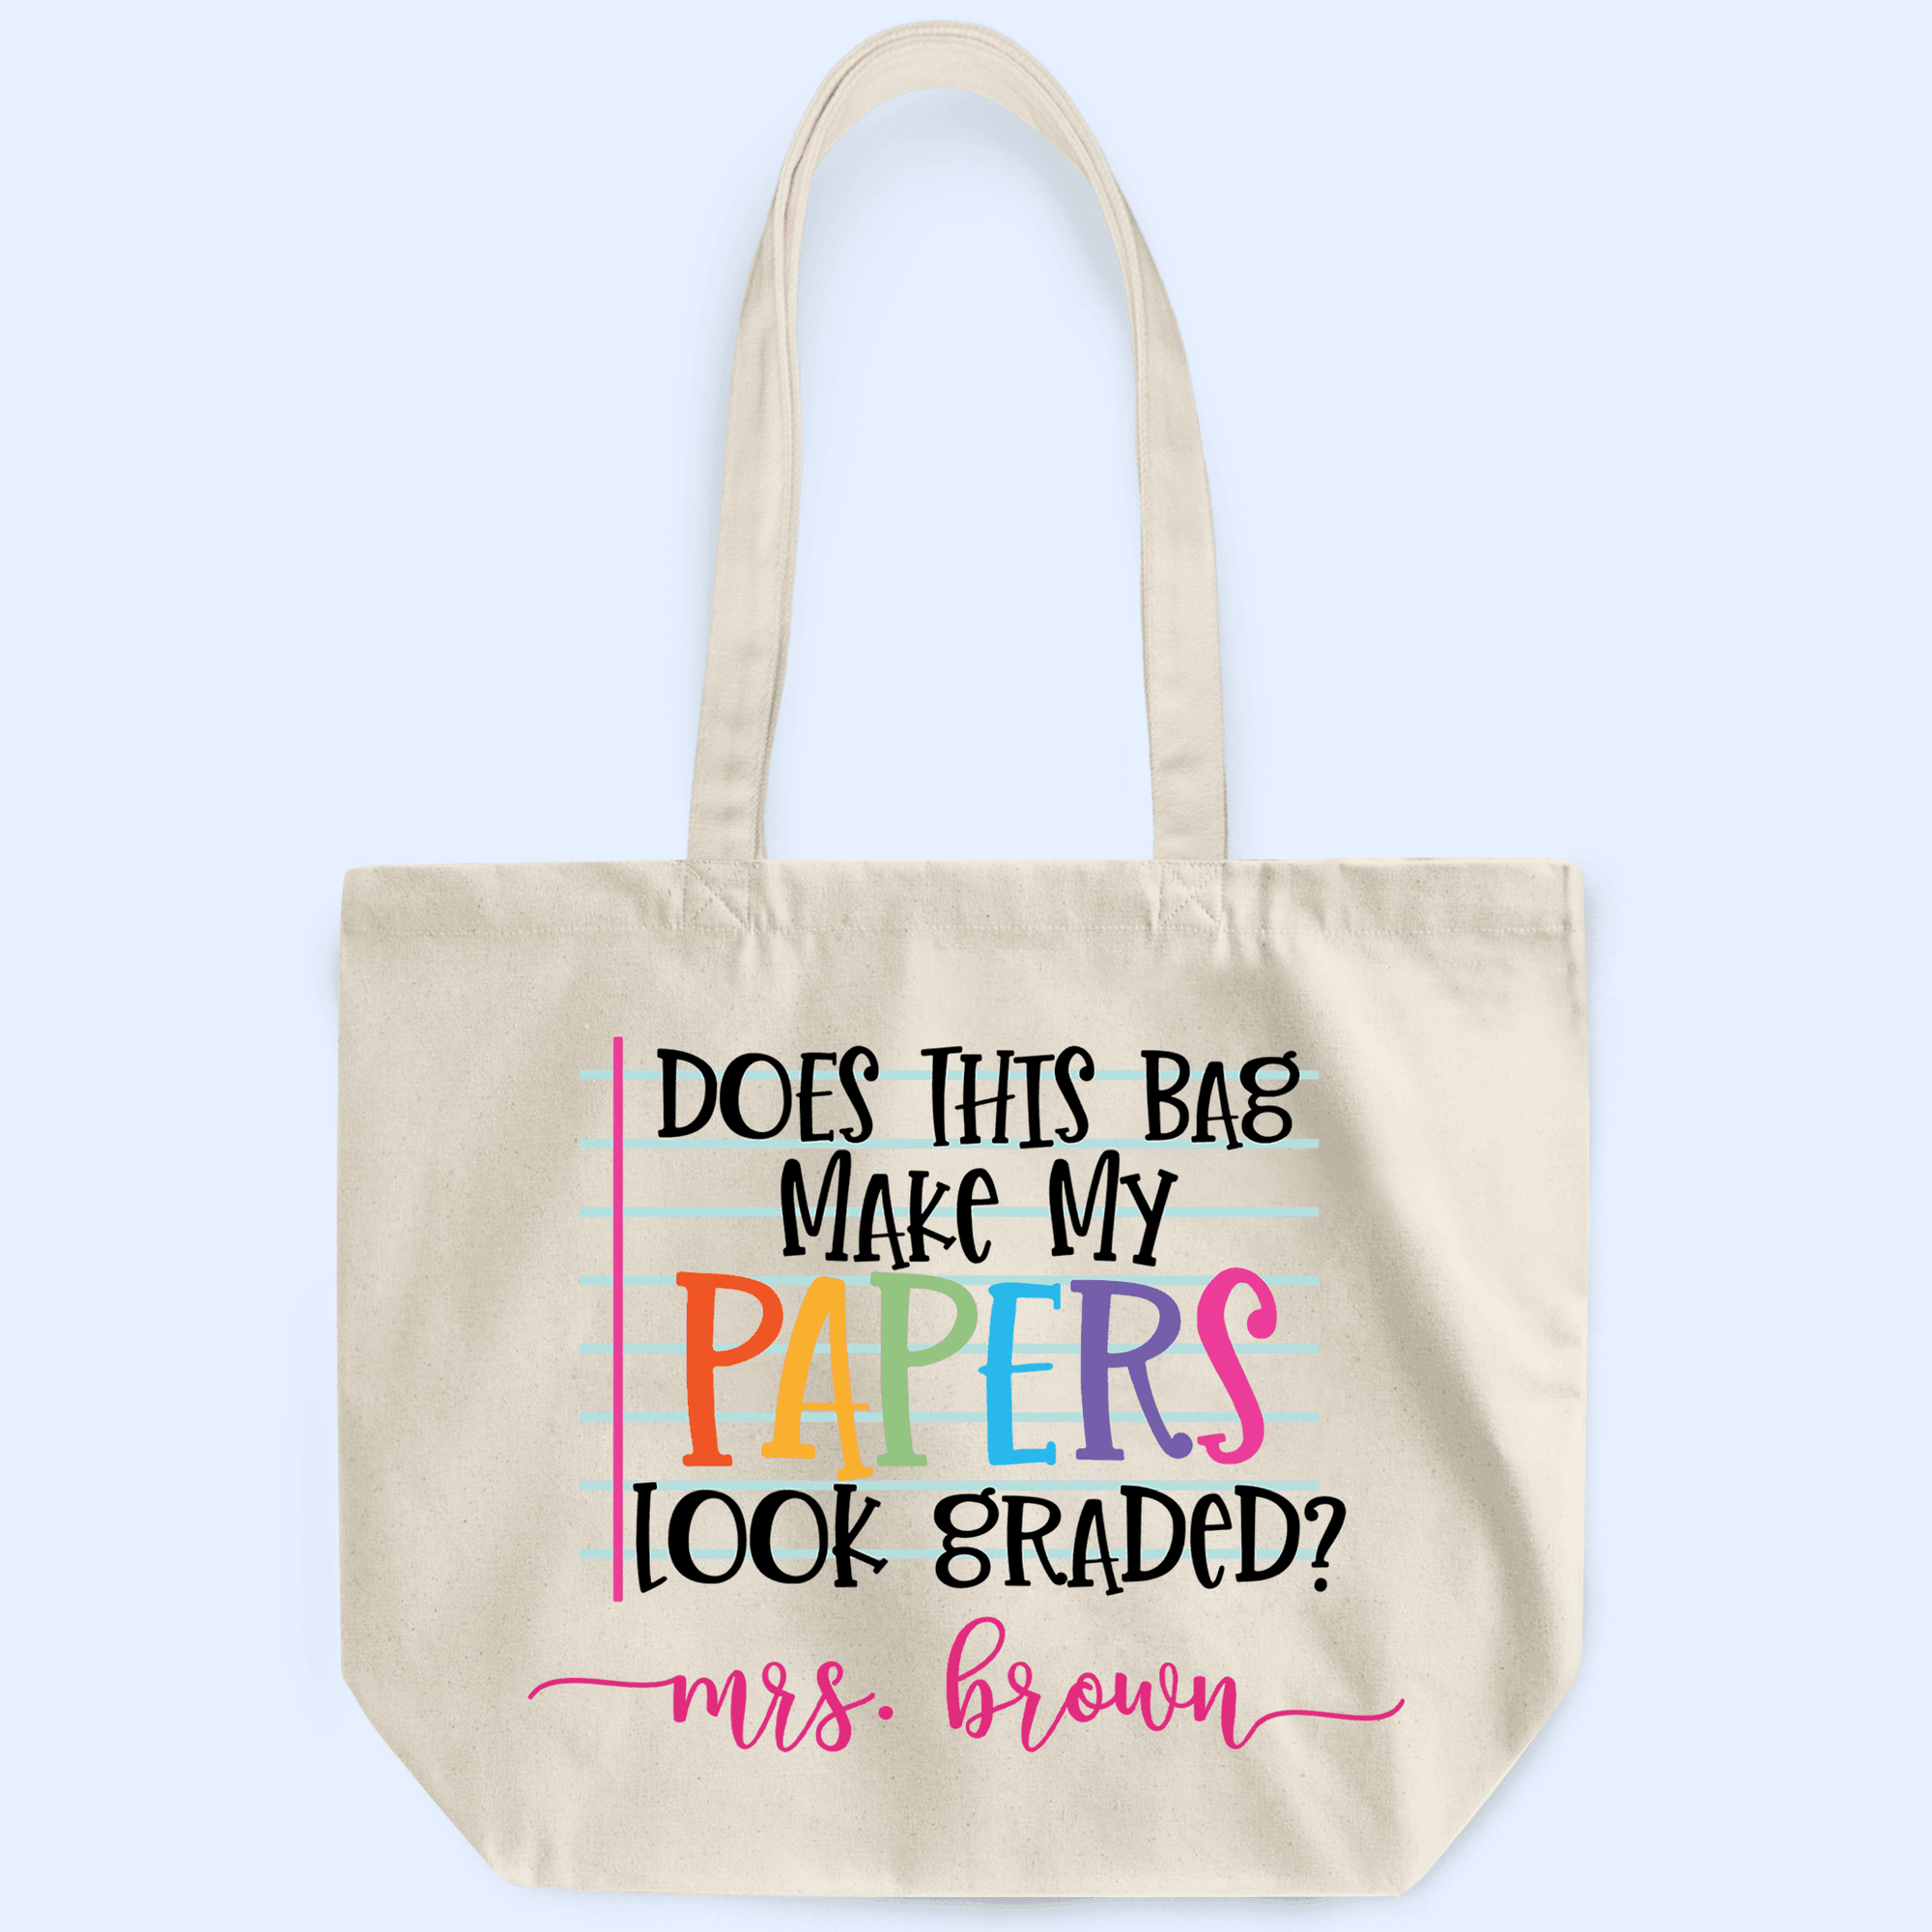 Does this bag make my papers look graded? - Personalized Custom Tote Bag - Birthday, Loving, Funny Gift for Teacher, Kindergarten, Preschool, Pre K, Paraprofessional, Educator - Suzitee Store